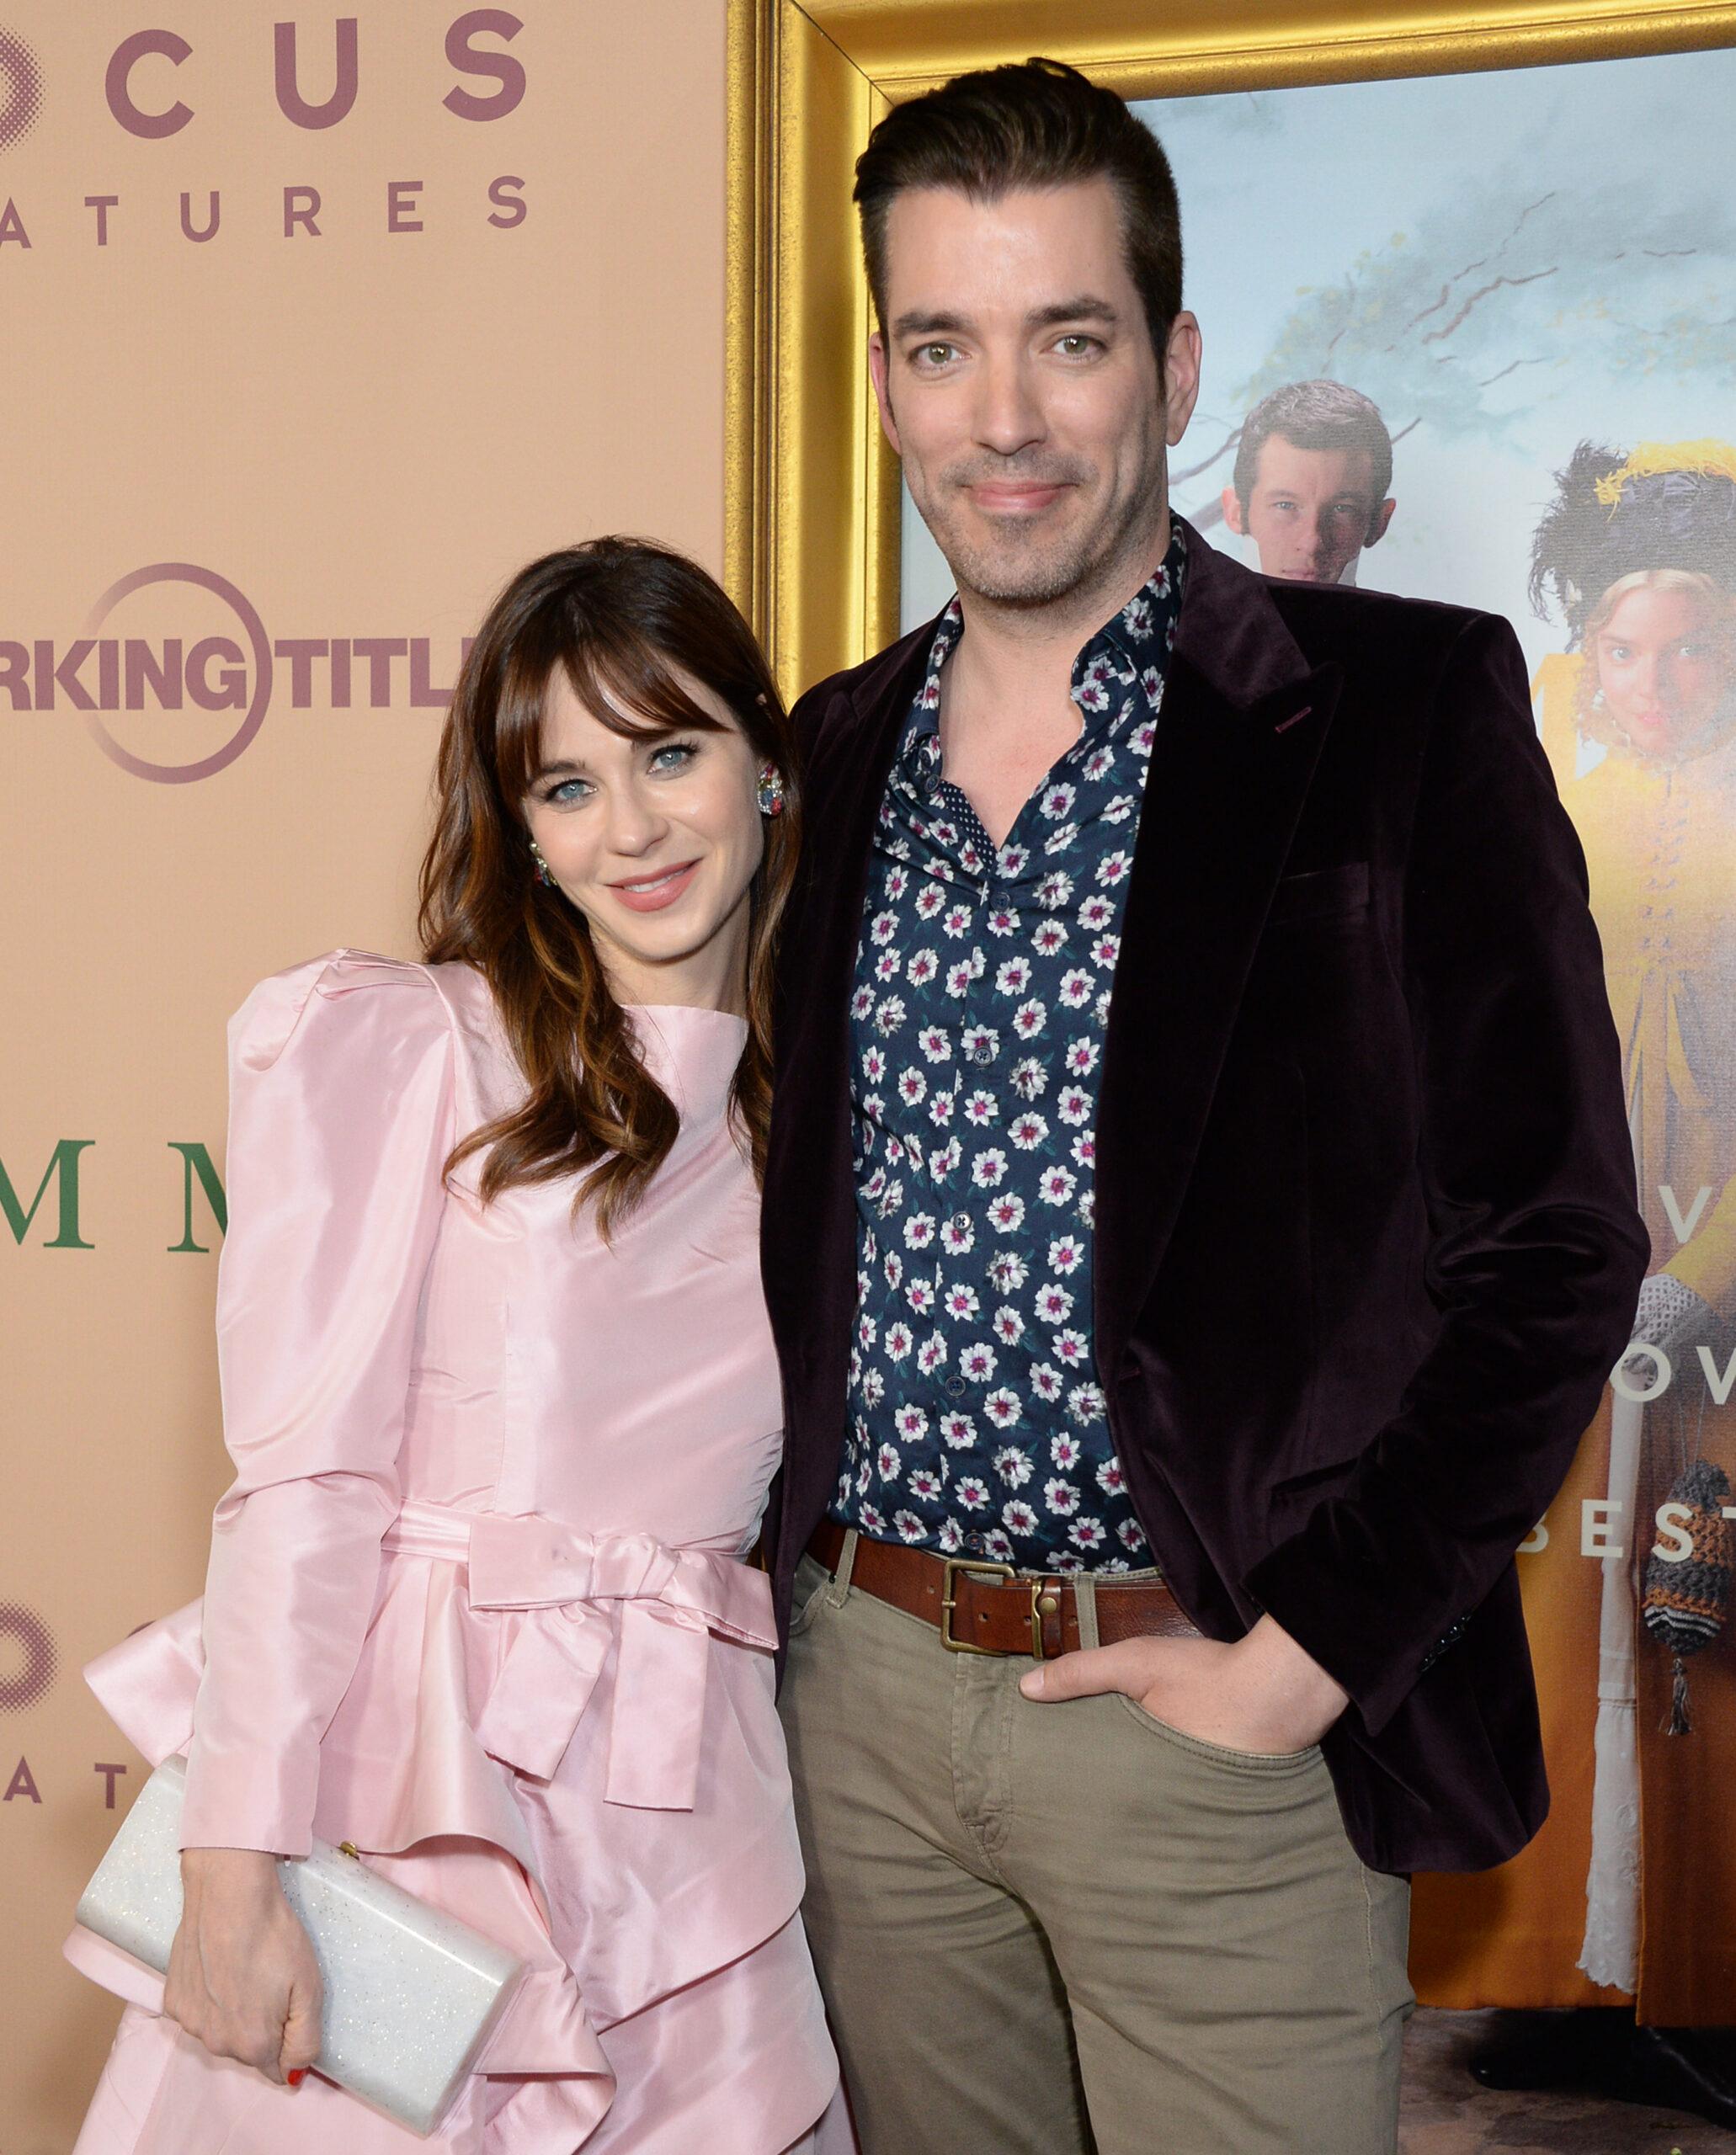 Zooey Deschanel and Jonathan Scott Attributes Their Growing Relationship To The Quarantine